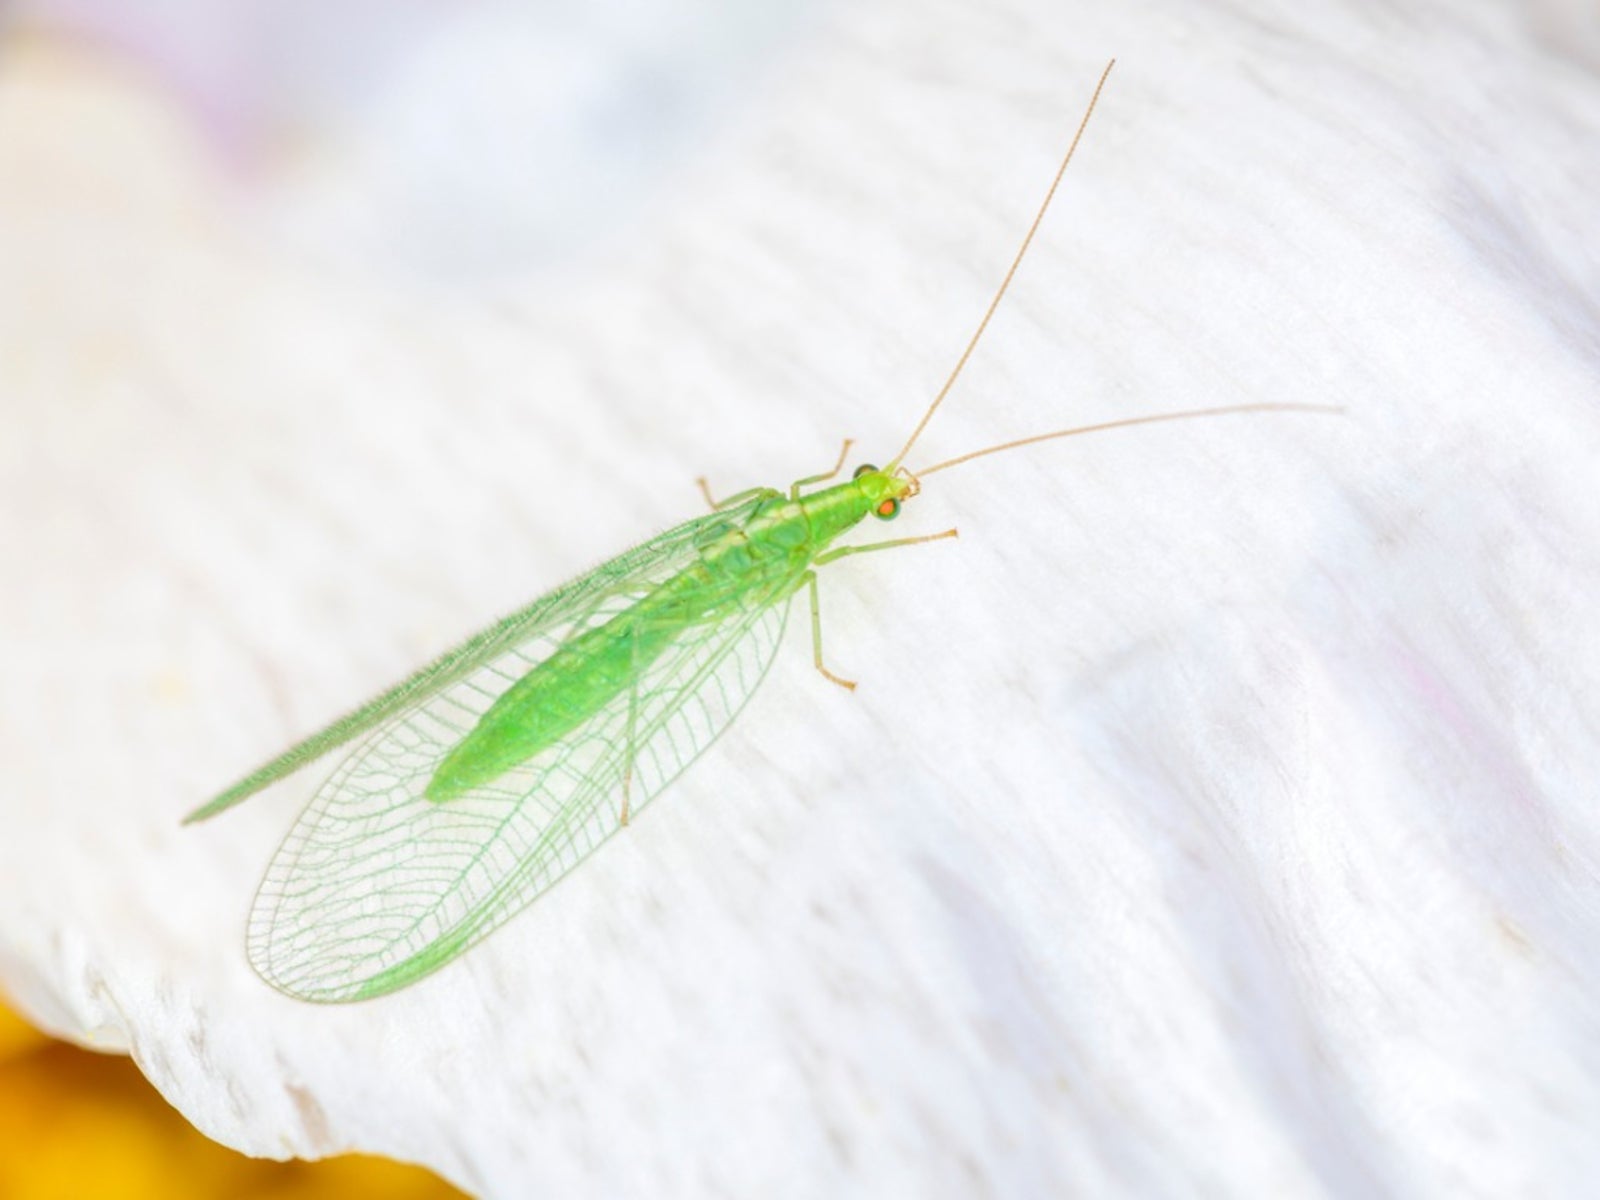 Lacewing Beneficial Insects - Taking Advantage Of Green Lacewings